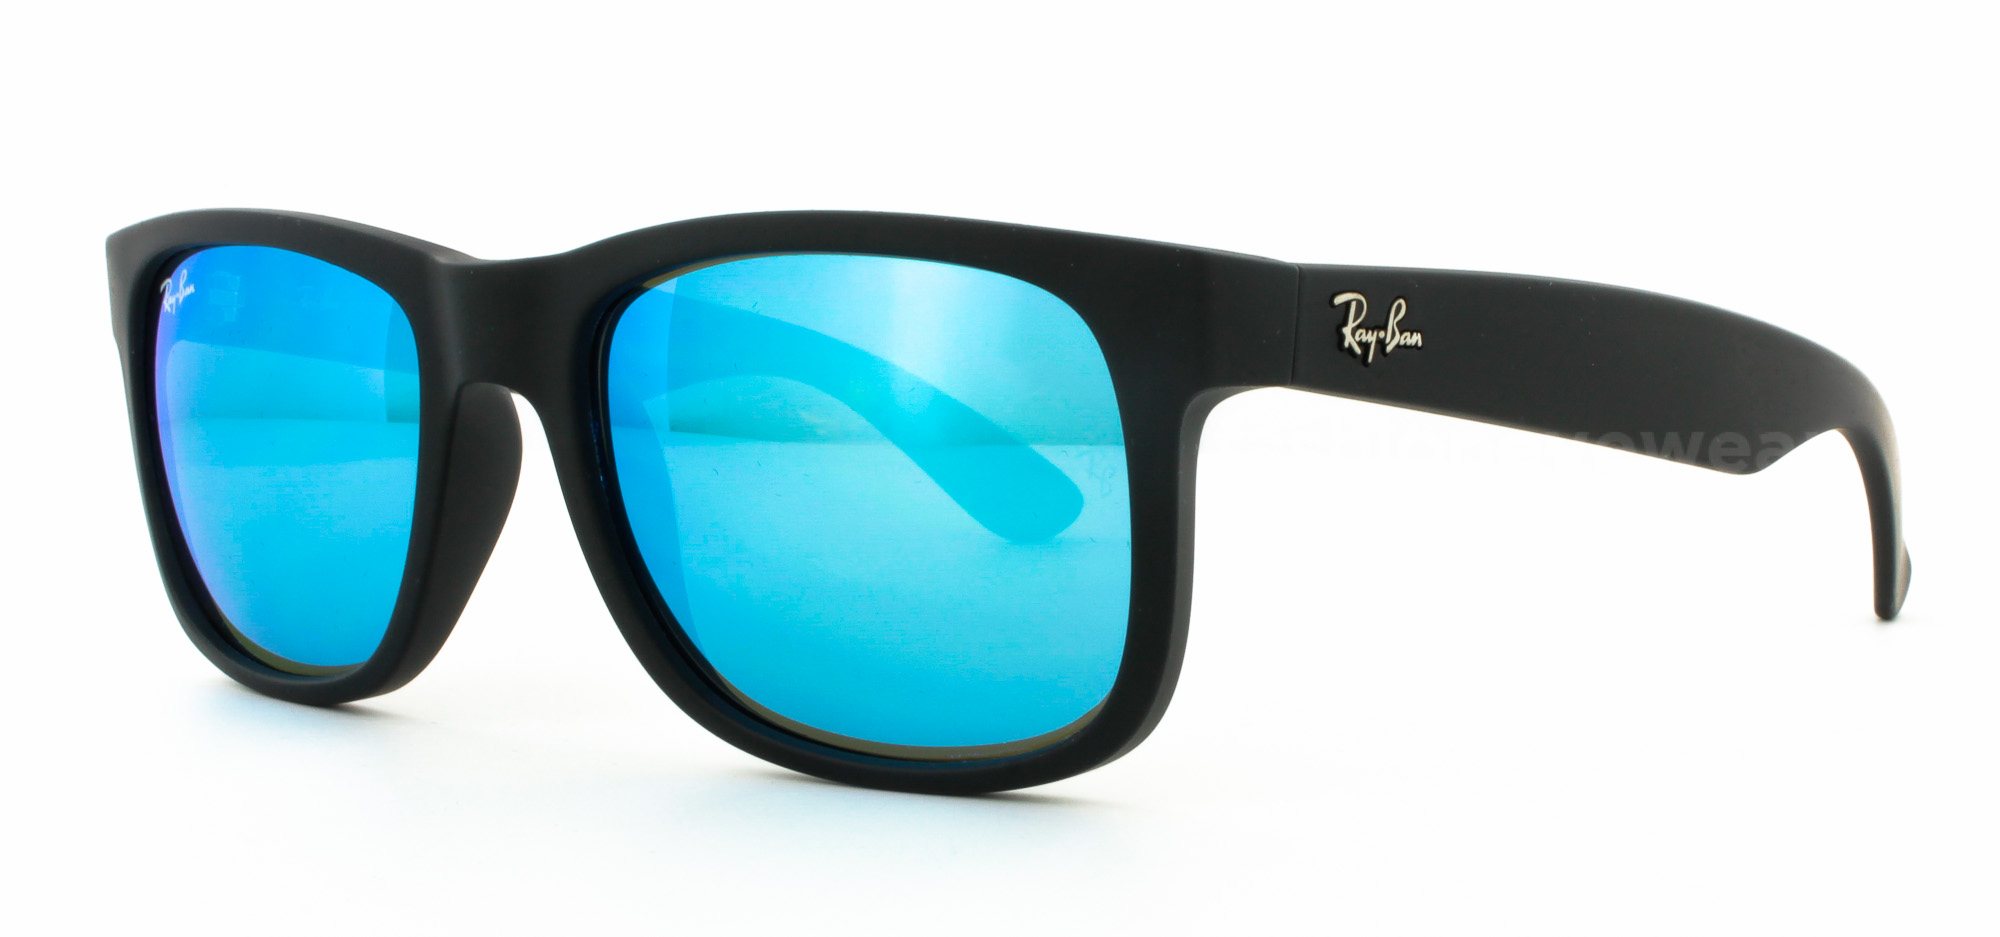 ray ban rb4165 justin sunglasses rubber gradient blue frame tra